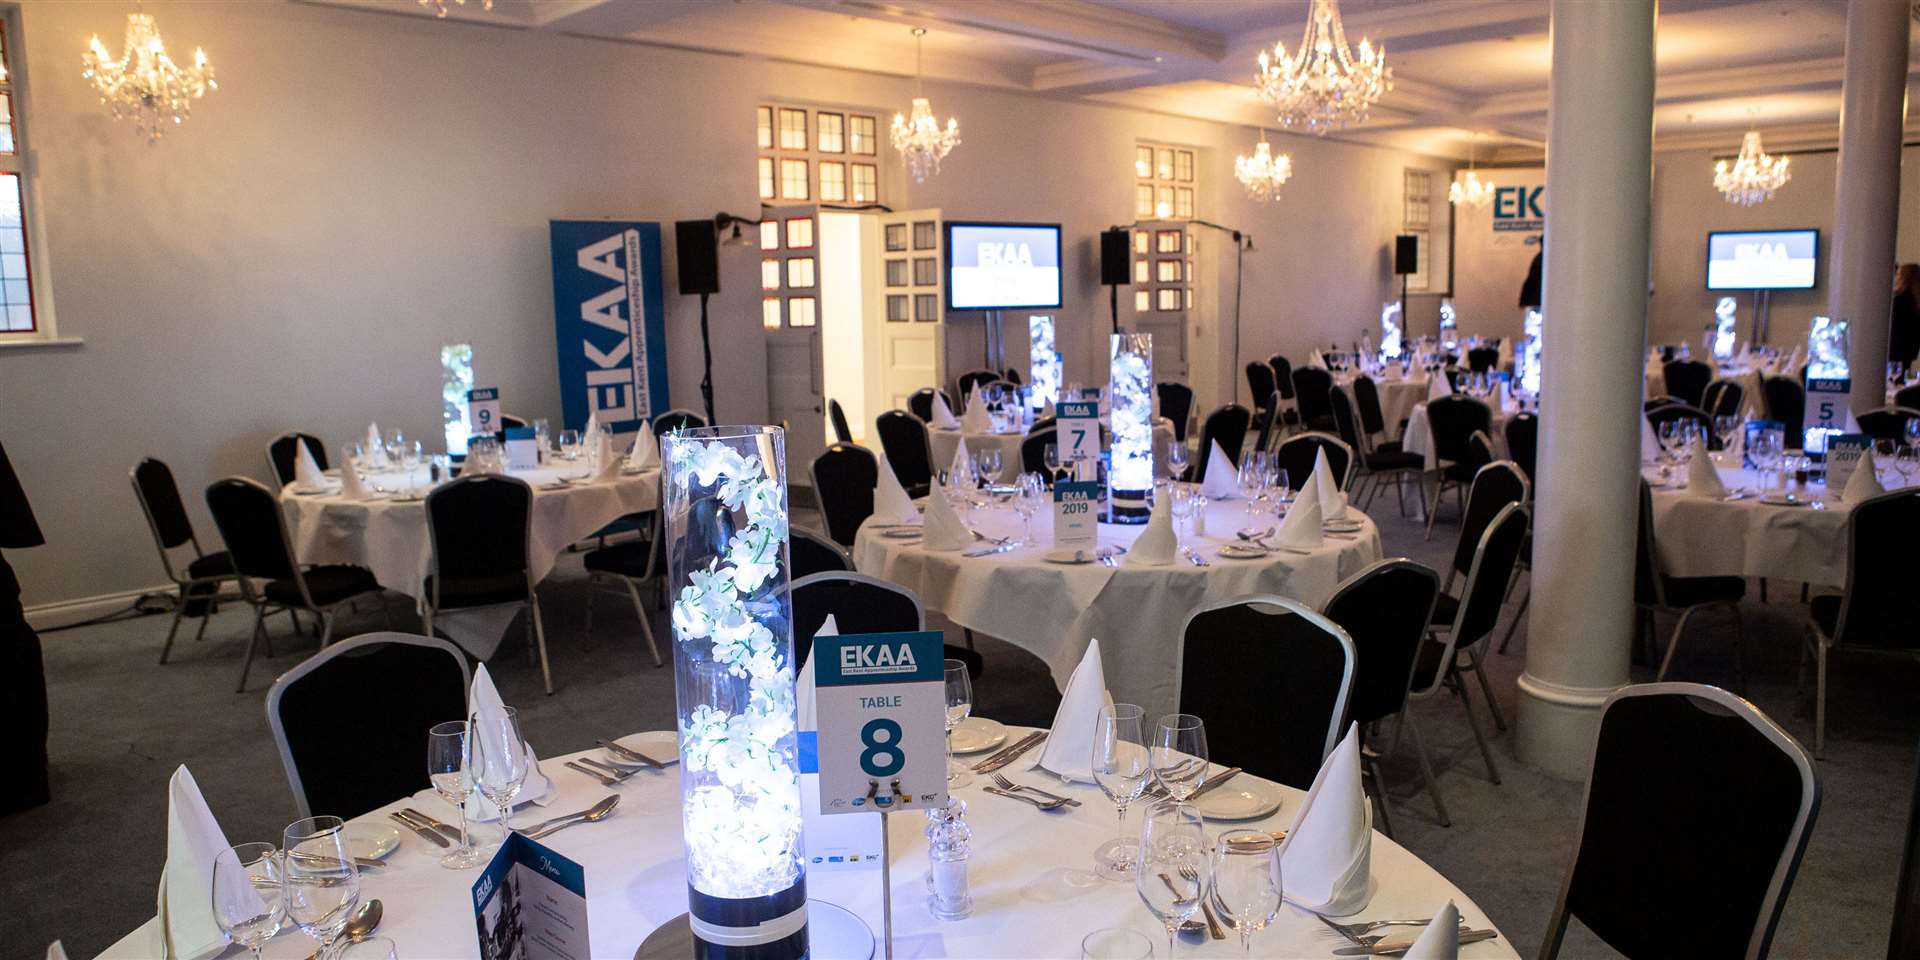 The winners will be announced at a special gala dinner awards event taking place at The Yarrow Hotel in Broadstairs on Wednesday, February 5 next year. (Photo by Matt Bristow/mattbristow.net)